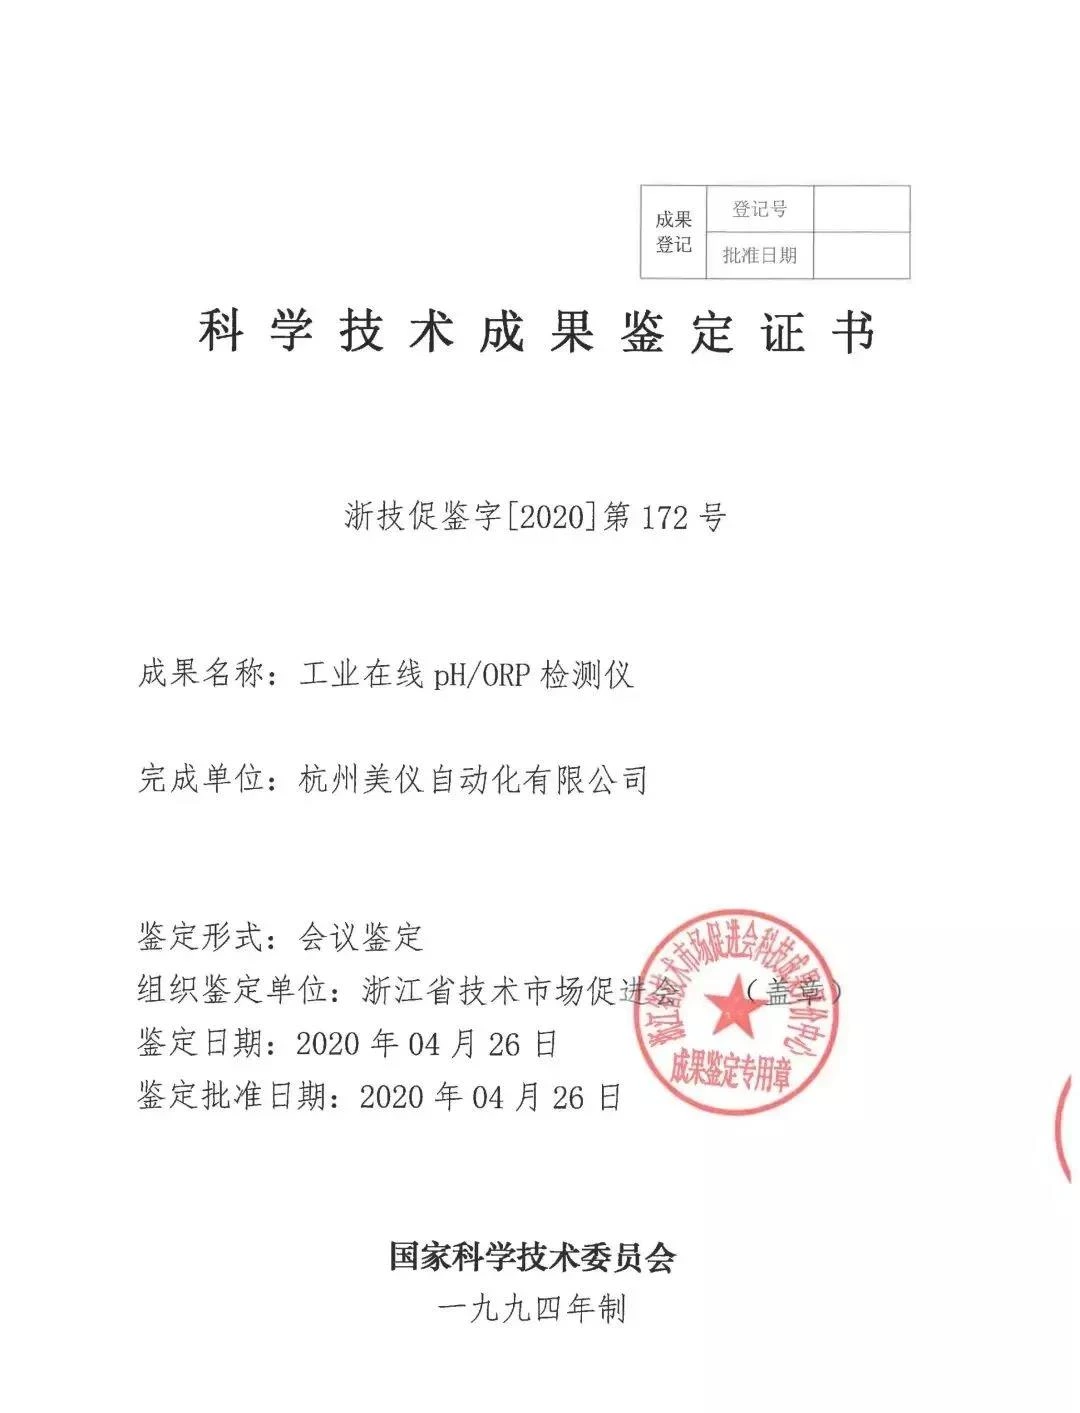 Deputy General Manager of Supmea, was hired as a tutor for postgraduates majoring in "mechanics" at Zhejiang University of Science and Technology.